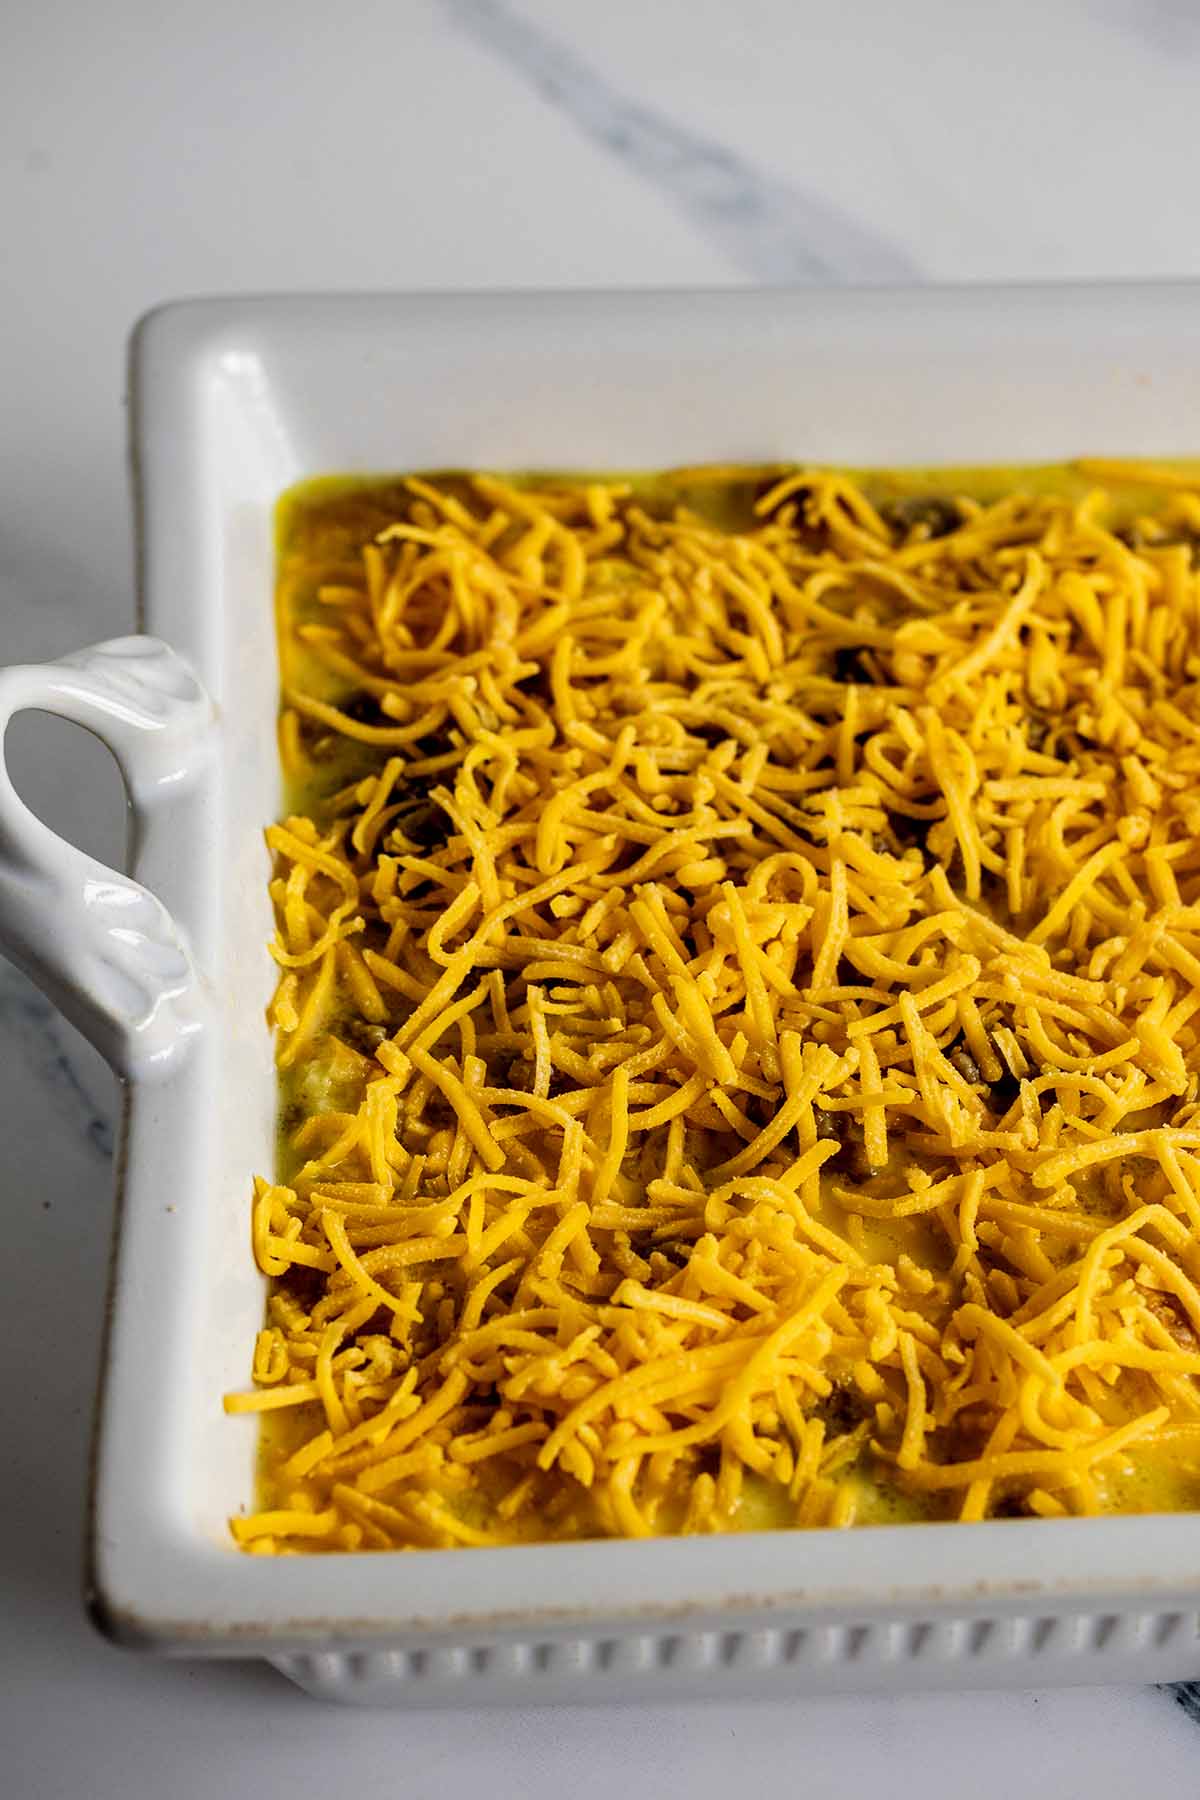 Shredded yellow cheddar cheese sprinkled on top of unbaked breakfast casserole